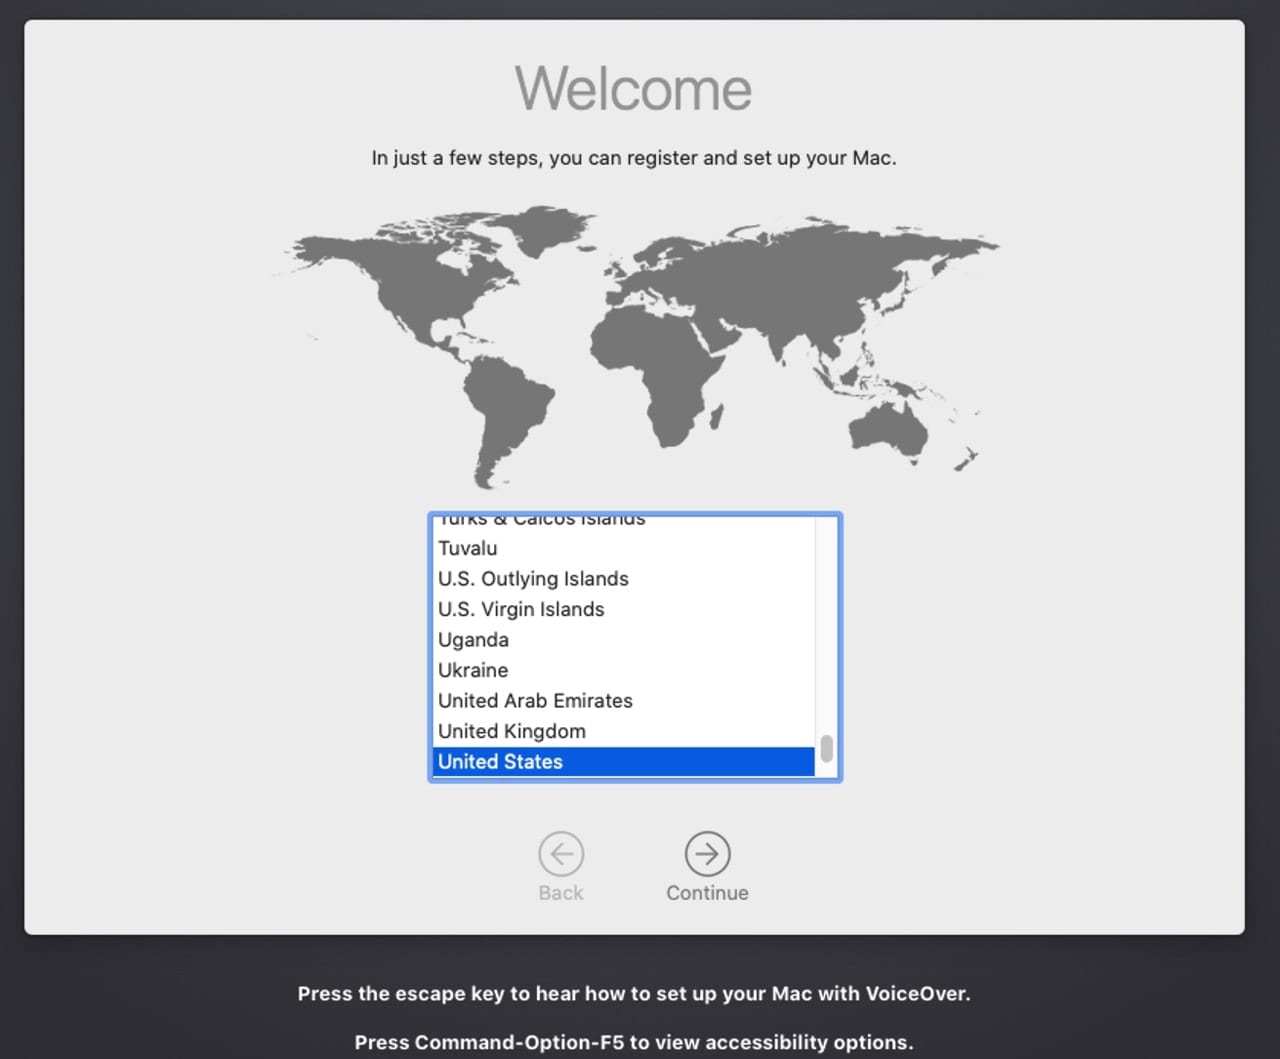 Select the country where the Mac is being used.